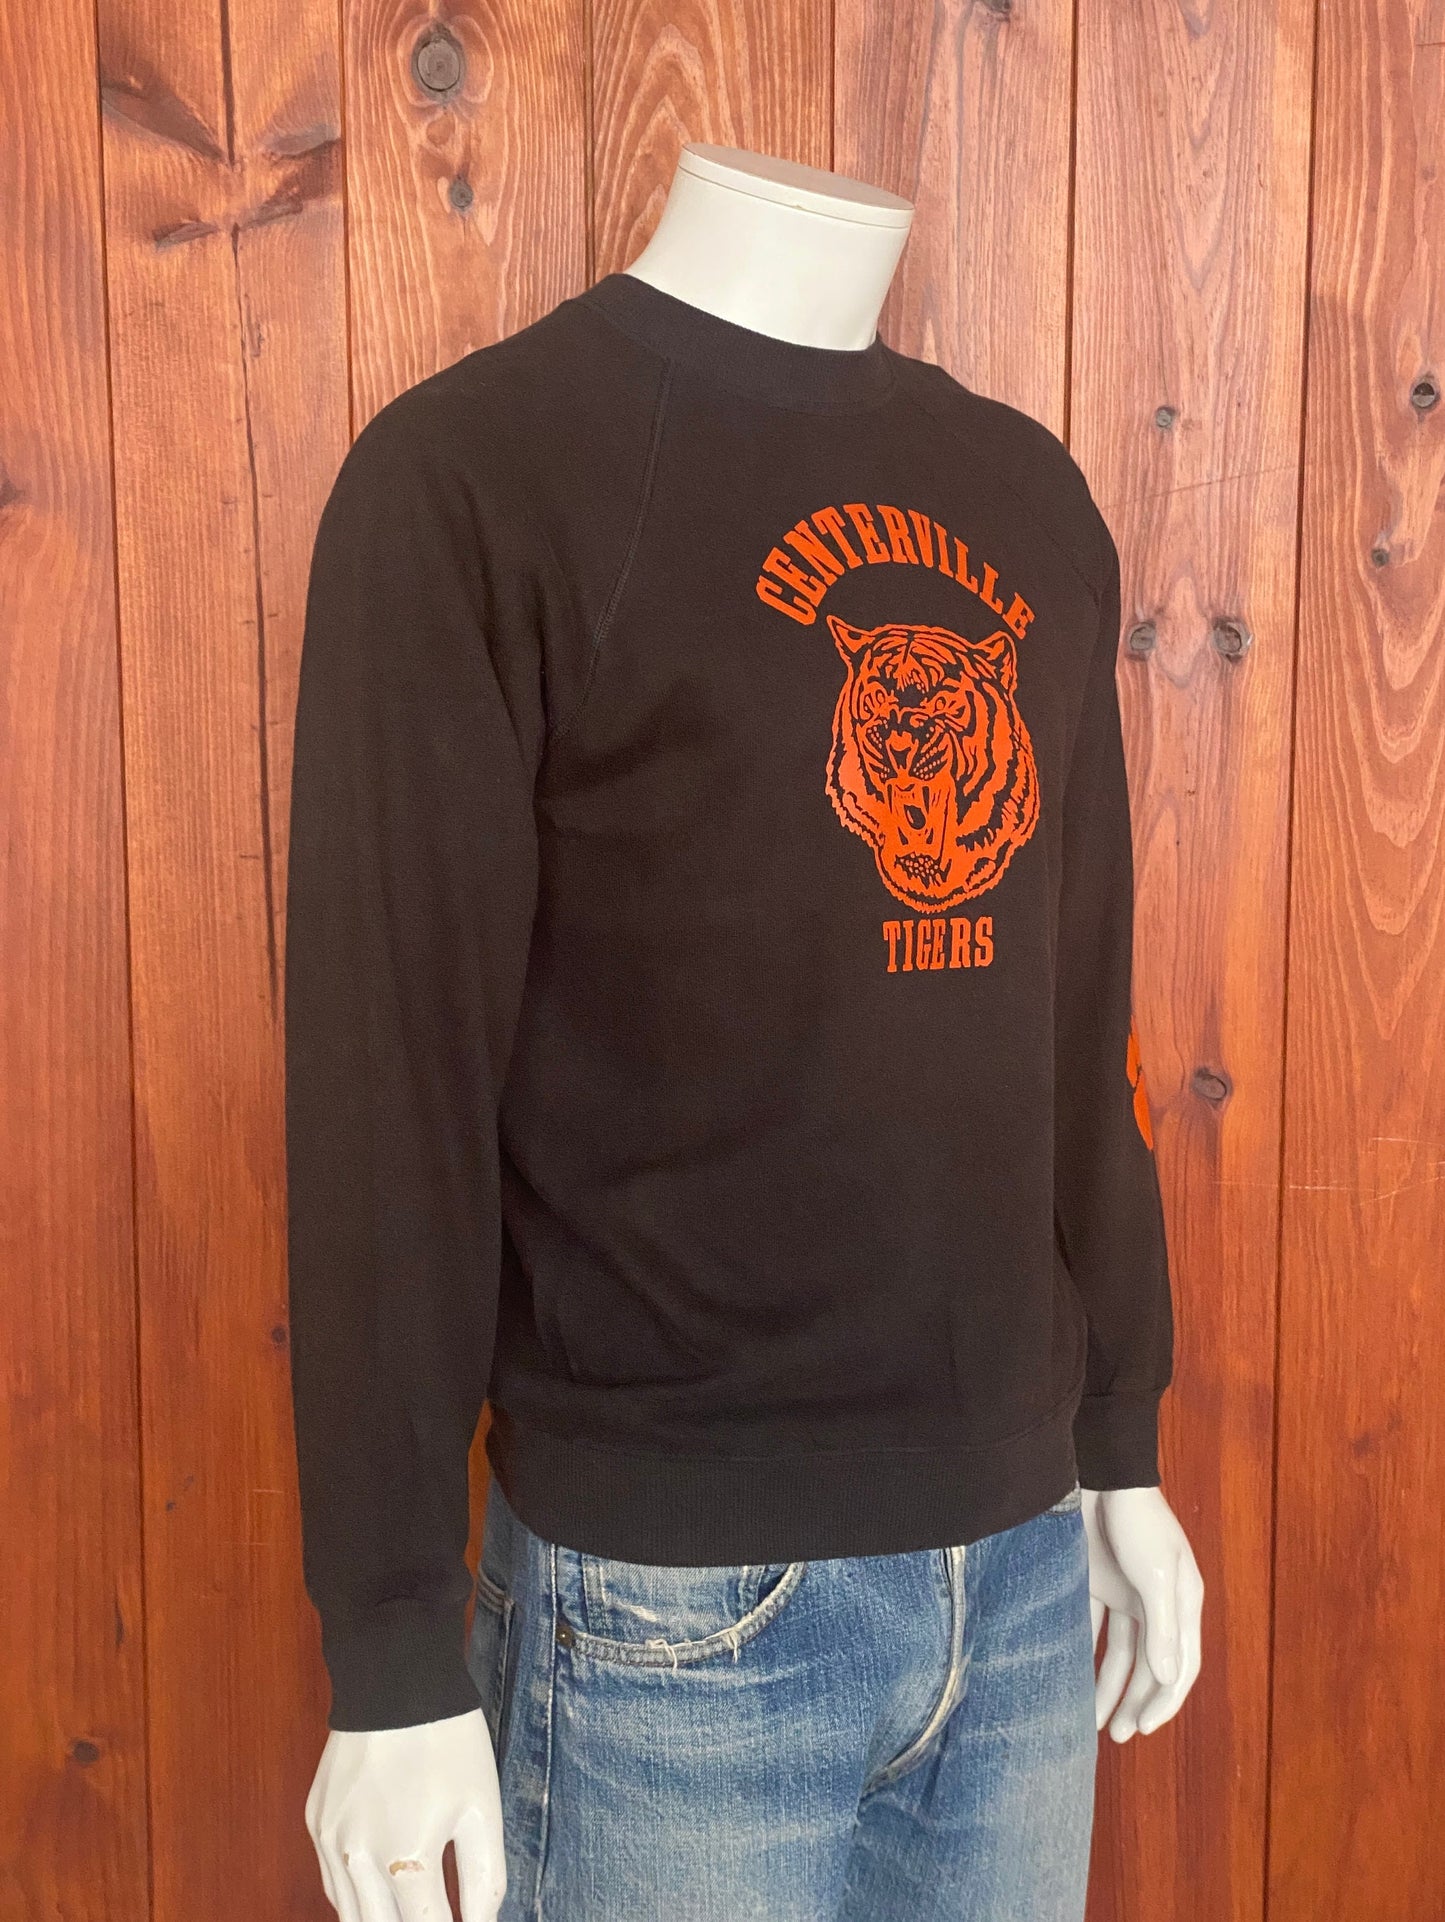 Size Med. Made In USA Centerville Tigers 80s vintage sweatshirt